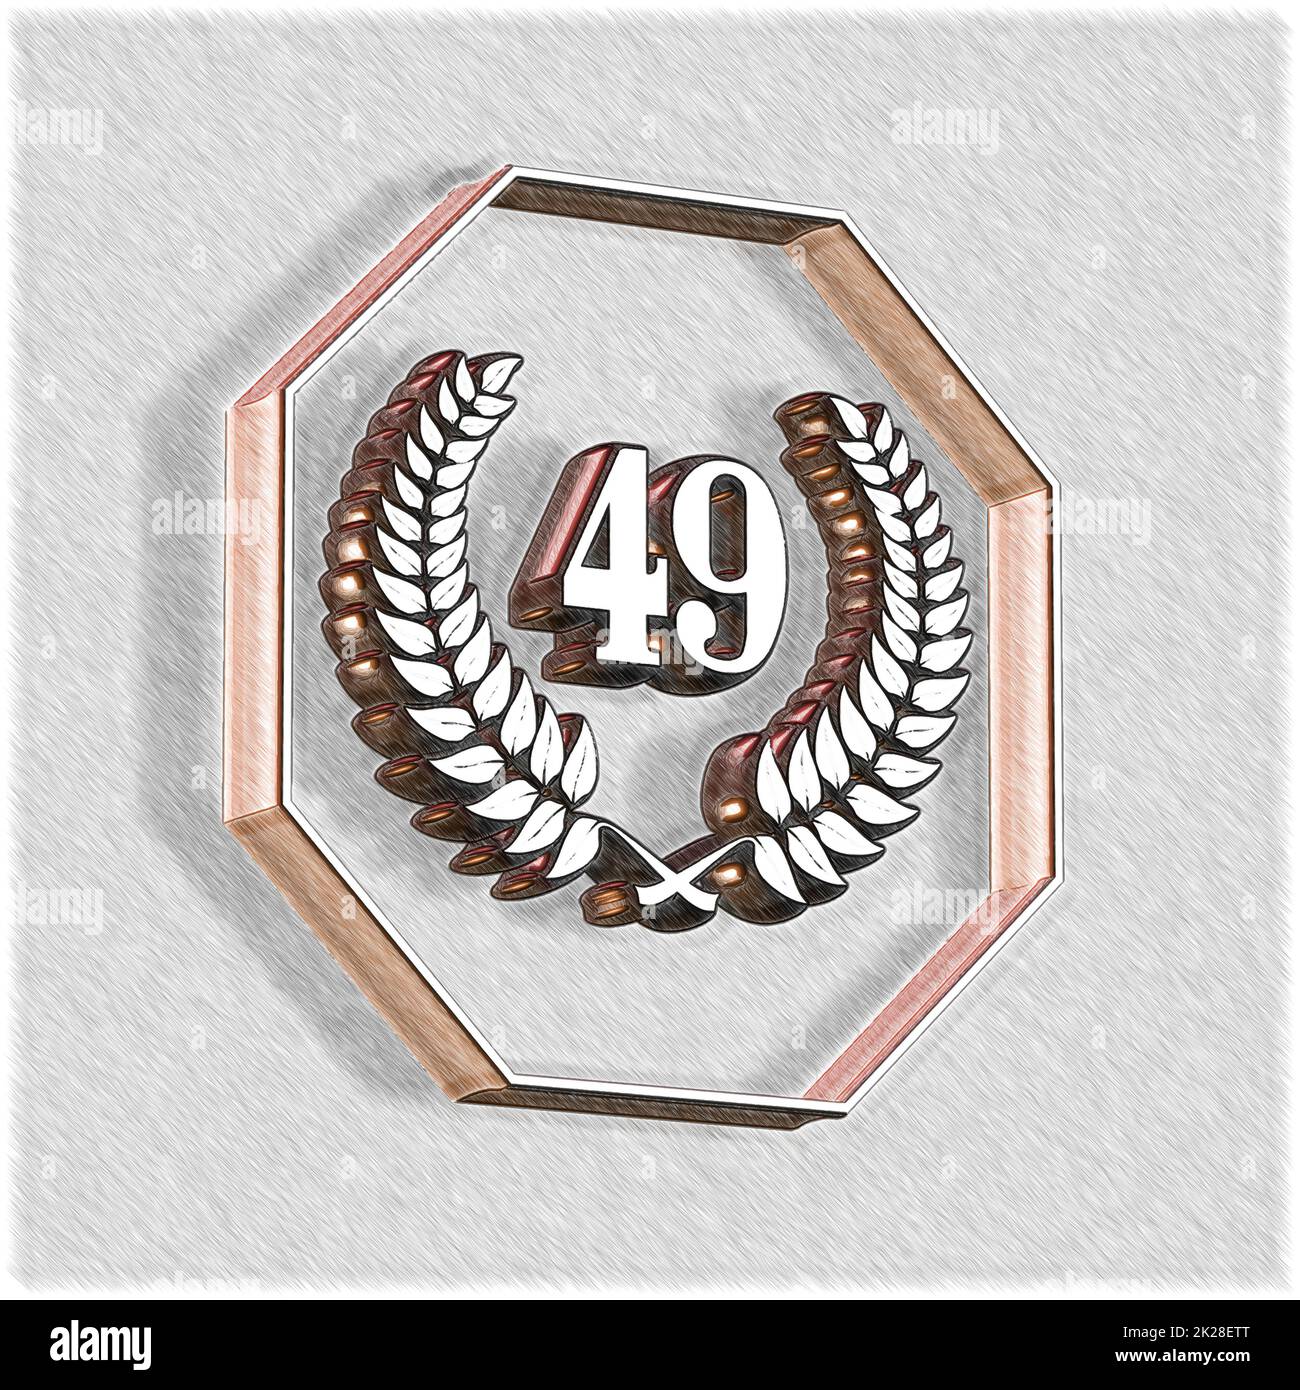 Number 49 with laurel wreath or honor wreath as a 3D-illustration, 3D-rendering Stock Photo